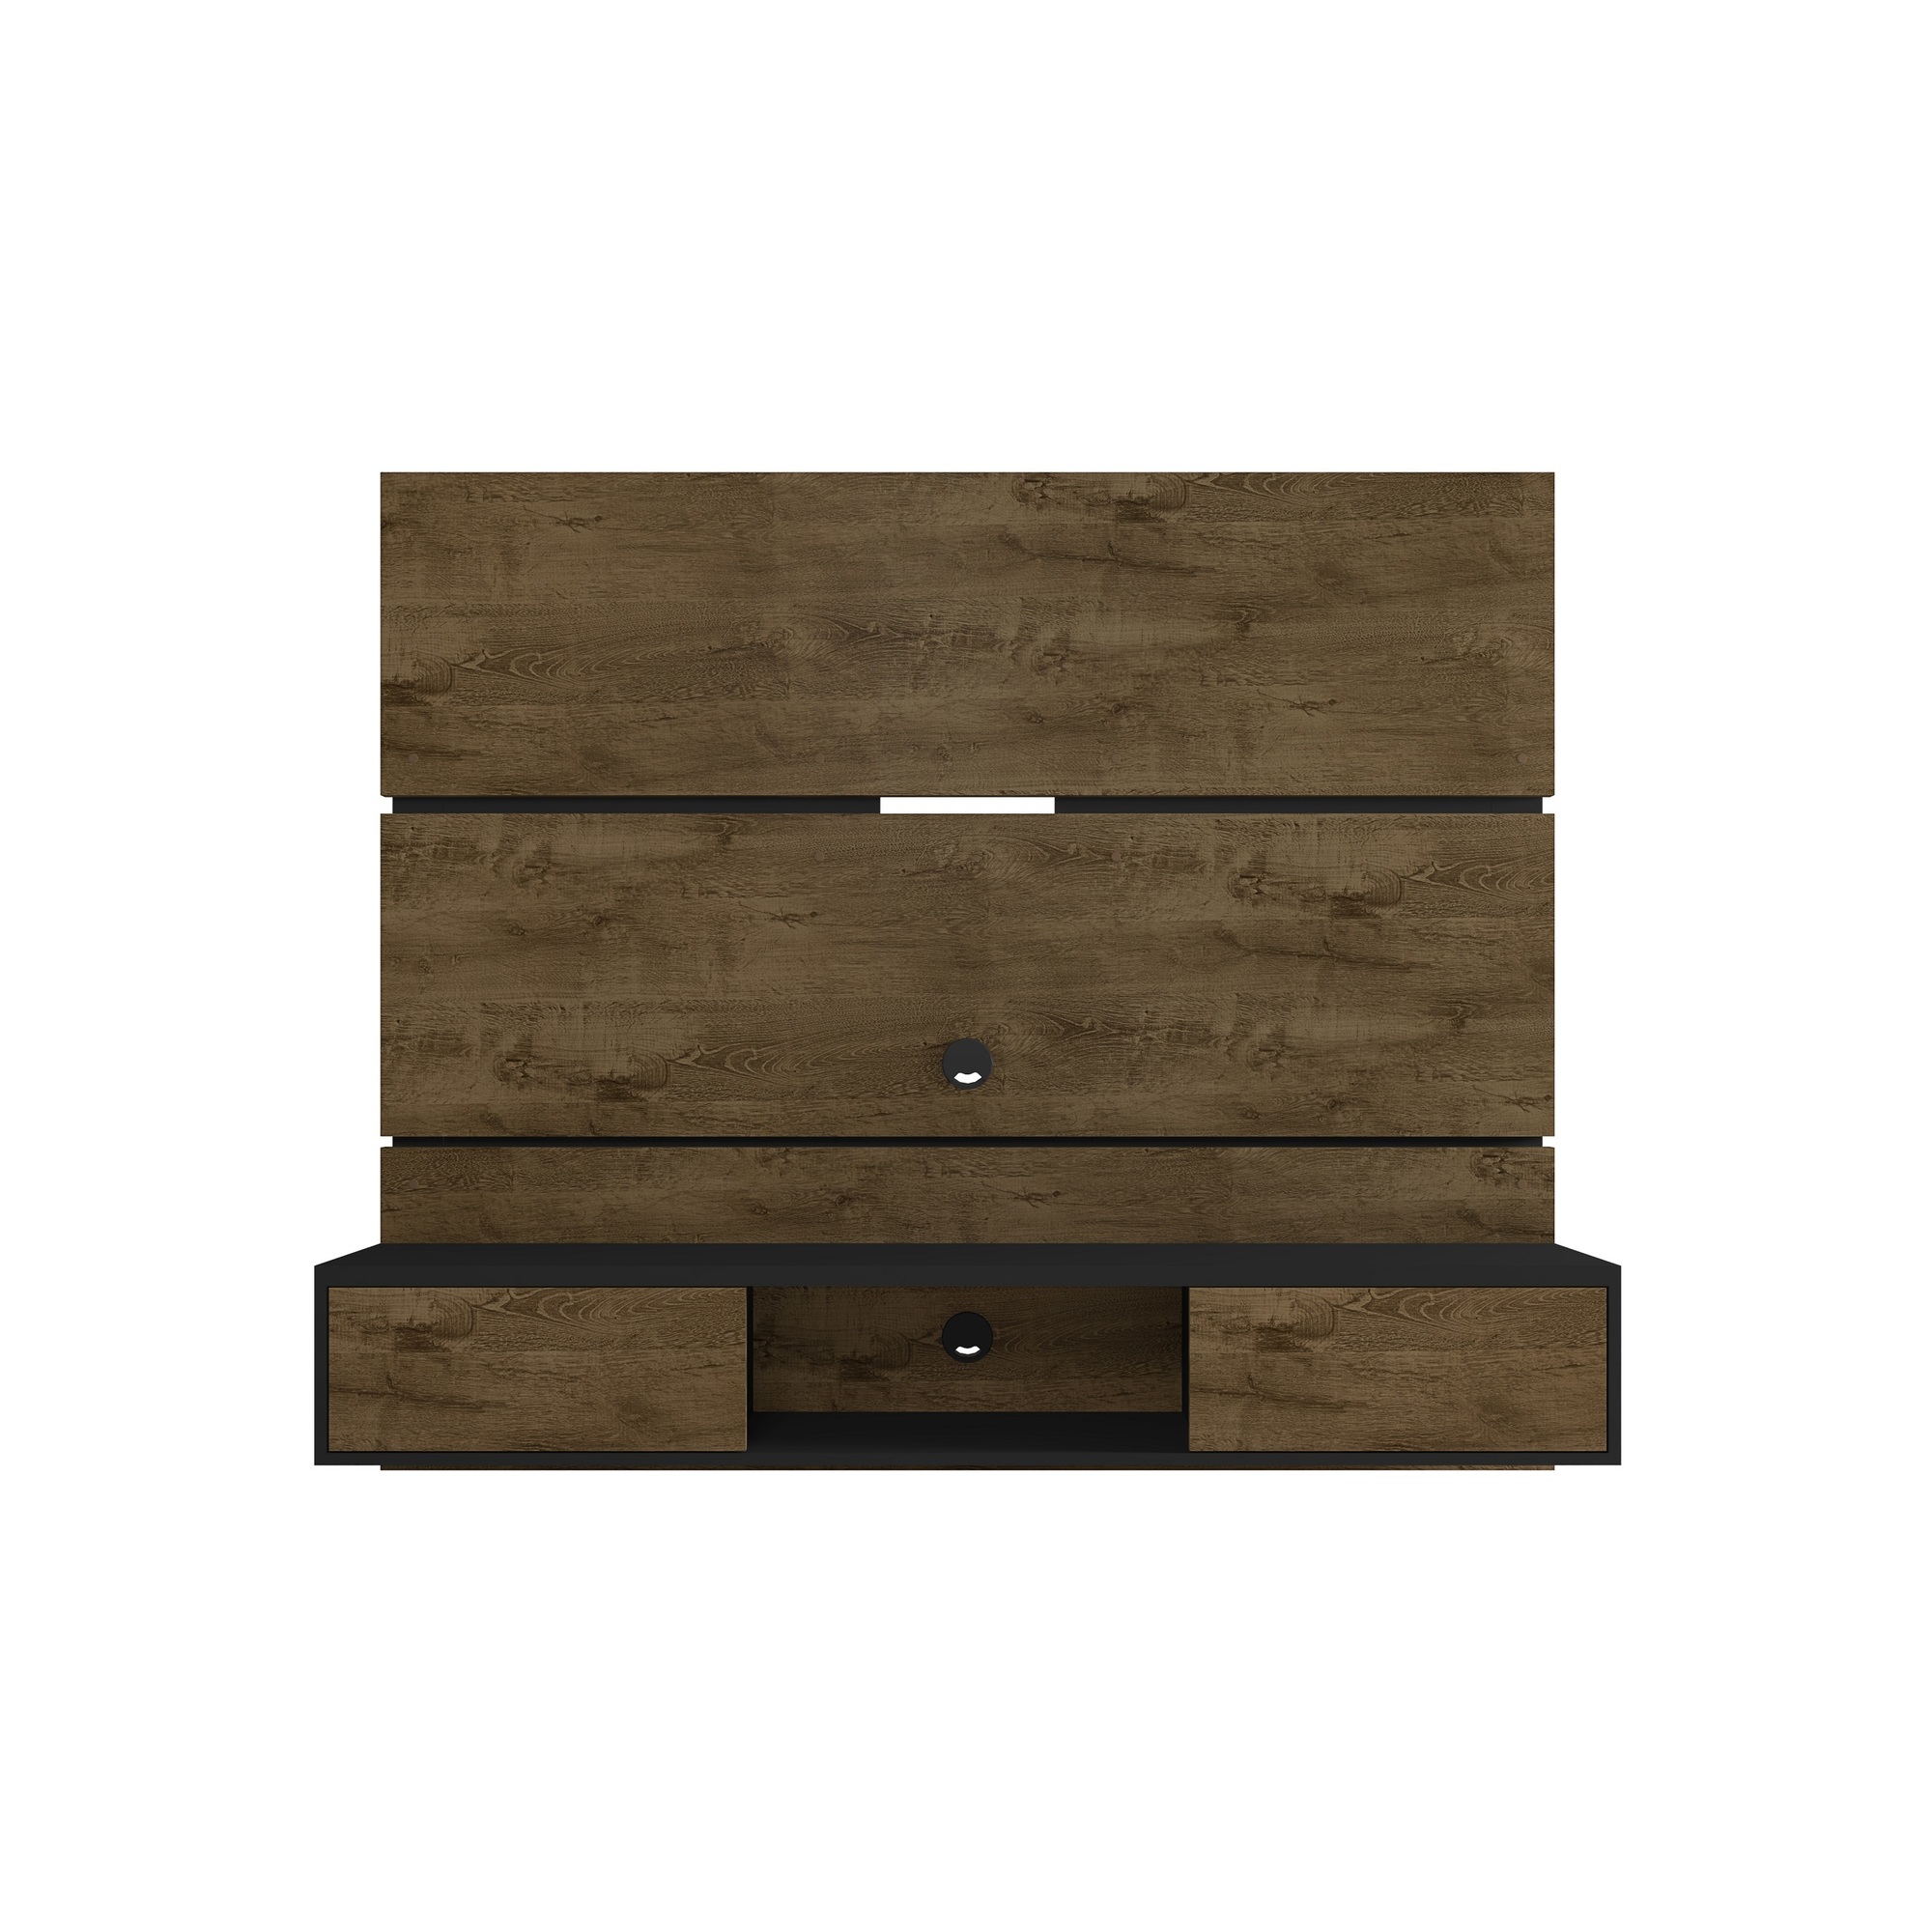 Manhattan Comfort, Vernon 62.99 Floating Wall Ent Cntr Brown Black, Width 62.99 in, Height 53.54 in, Depth 12.87 in, Model 236BMC